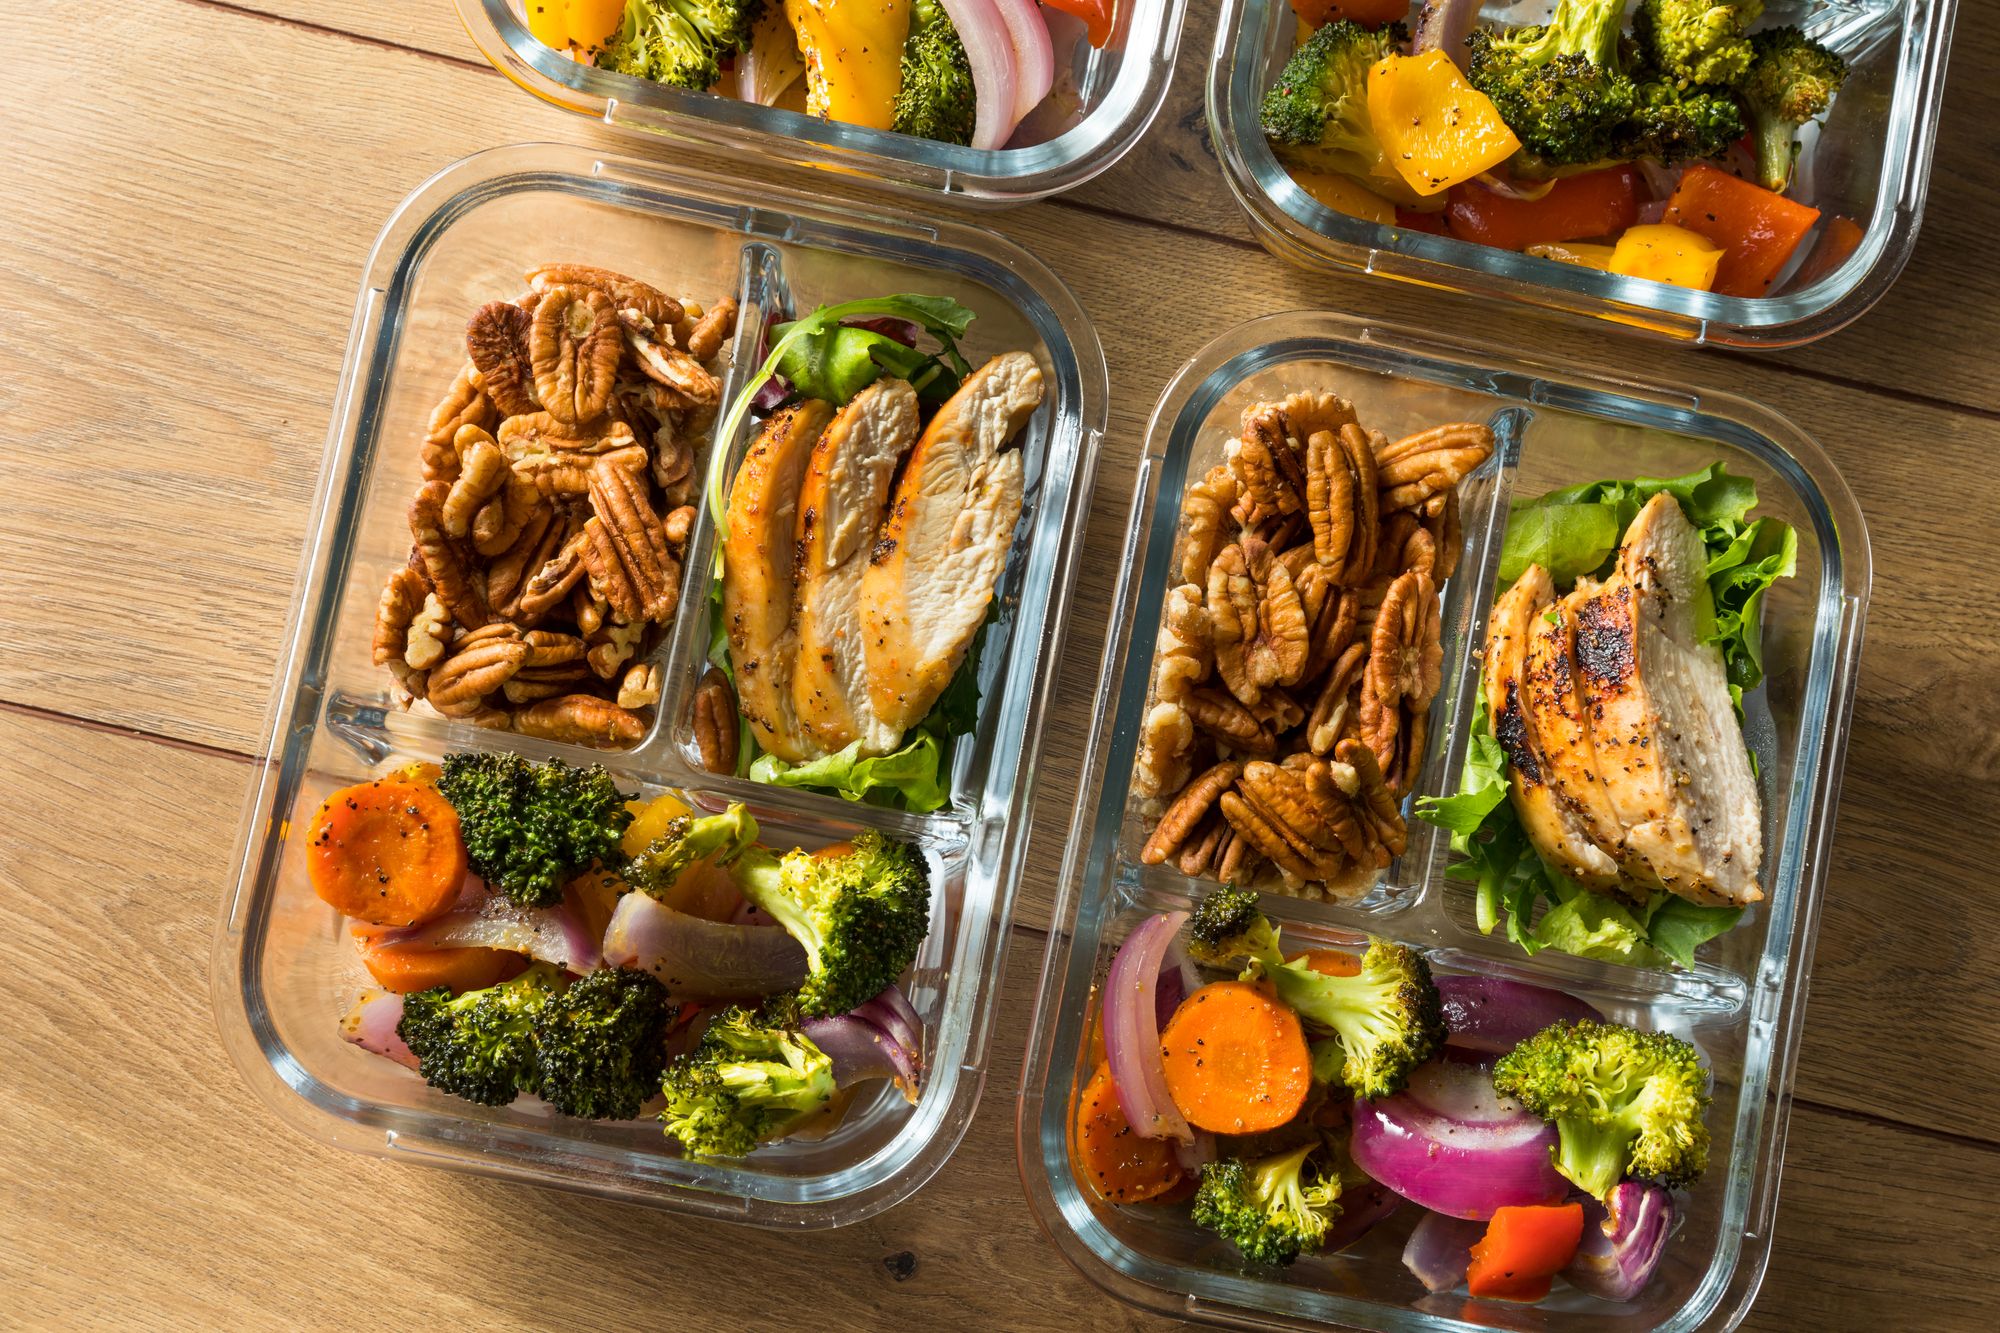 High protein meal planning